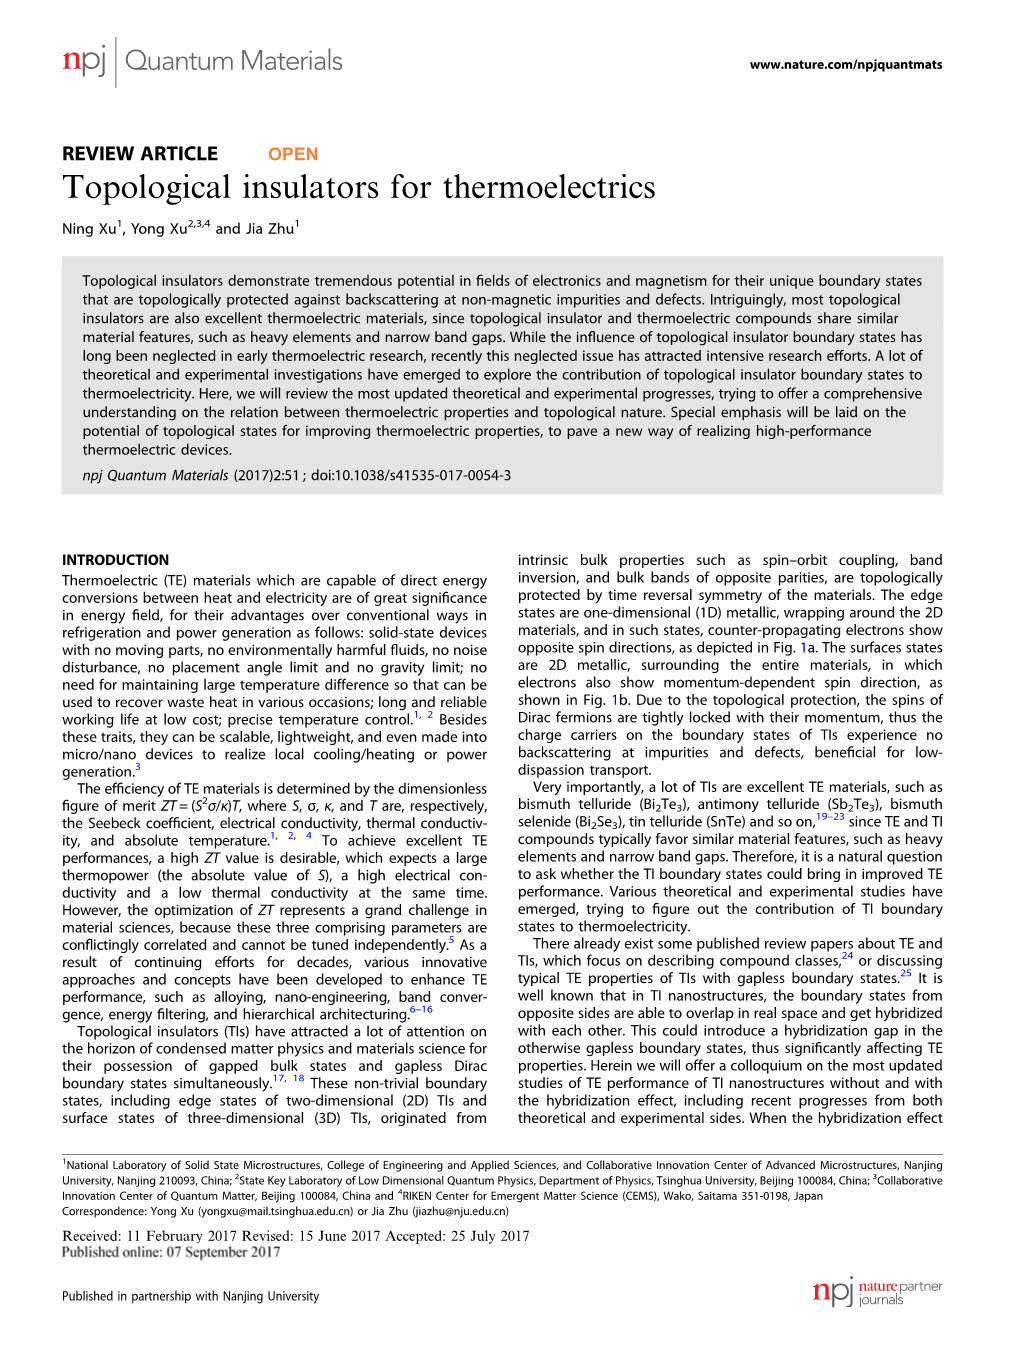 Topological Insulators for Thermoelectrics